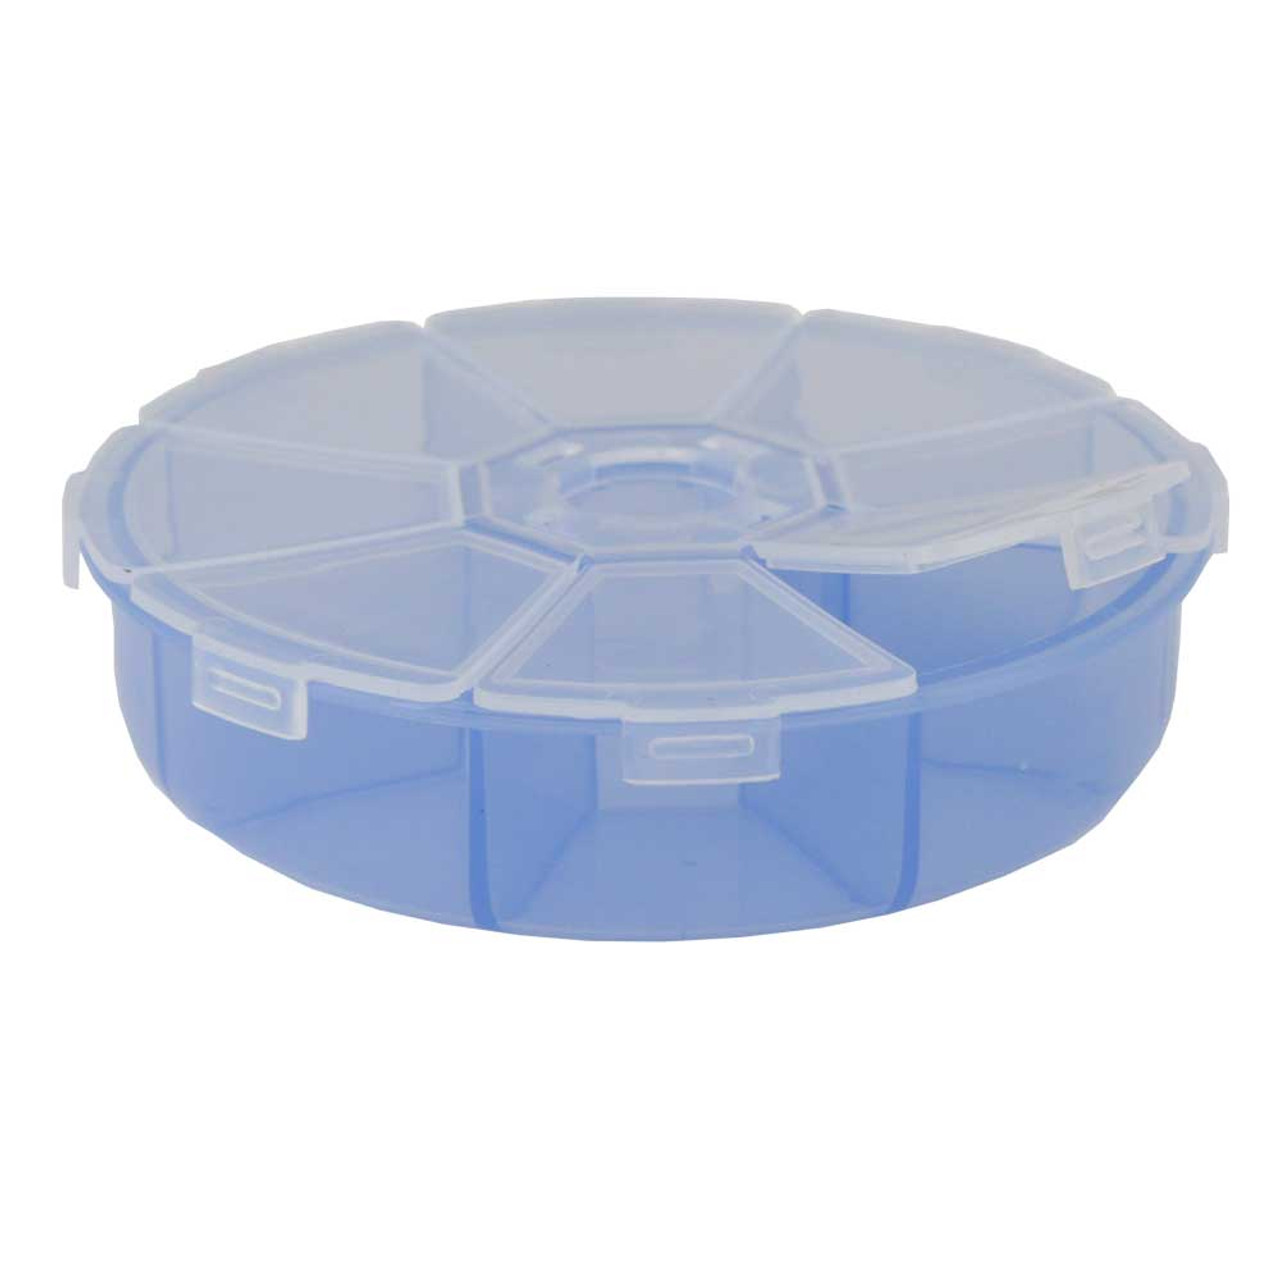 8 Compartment Round Plastic Storage Box with Snap Closure CLEARANCE